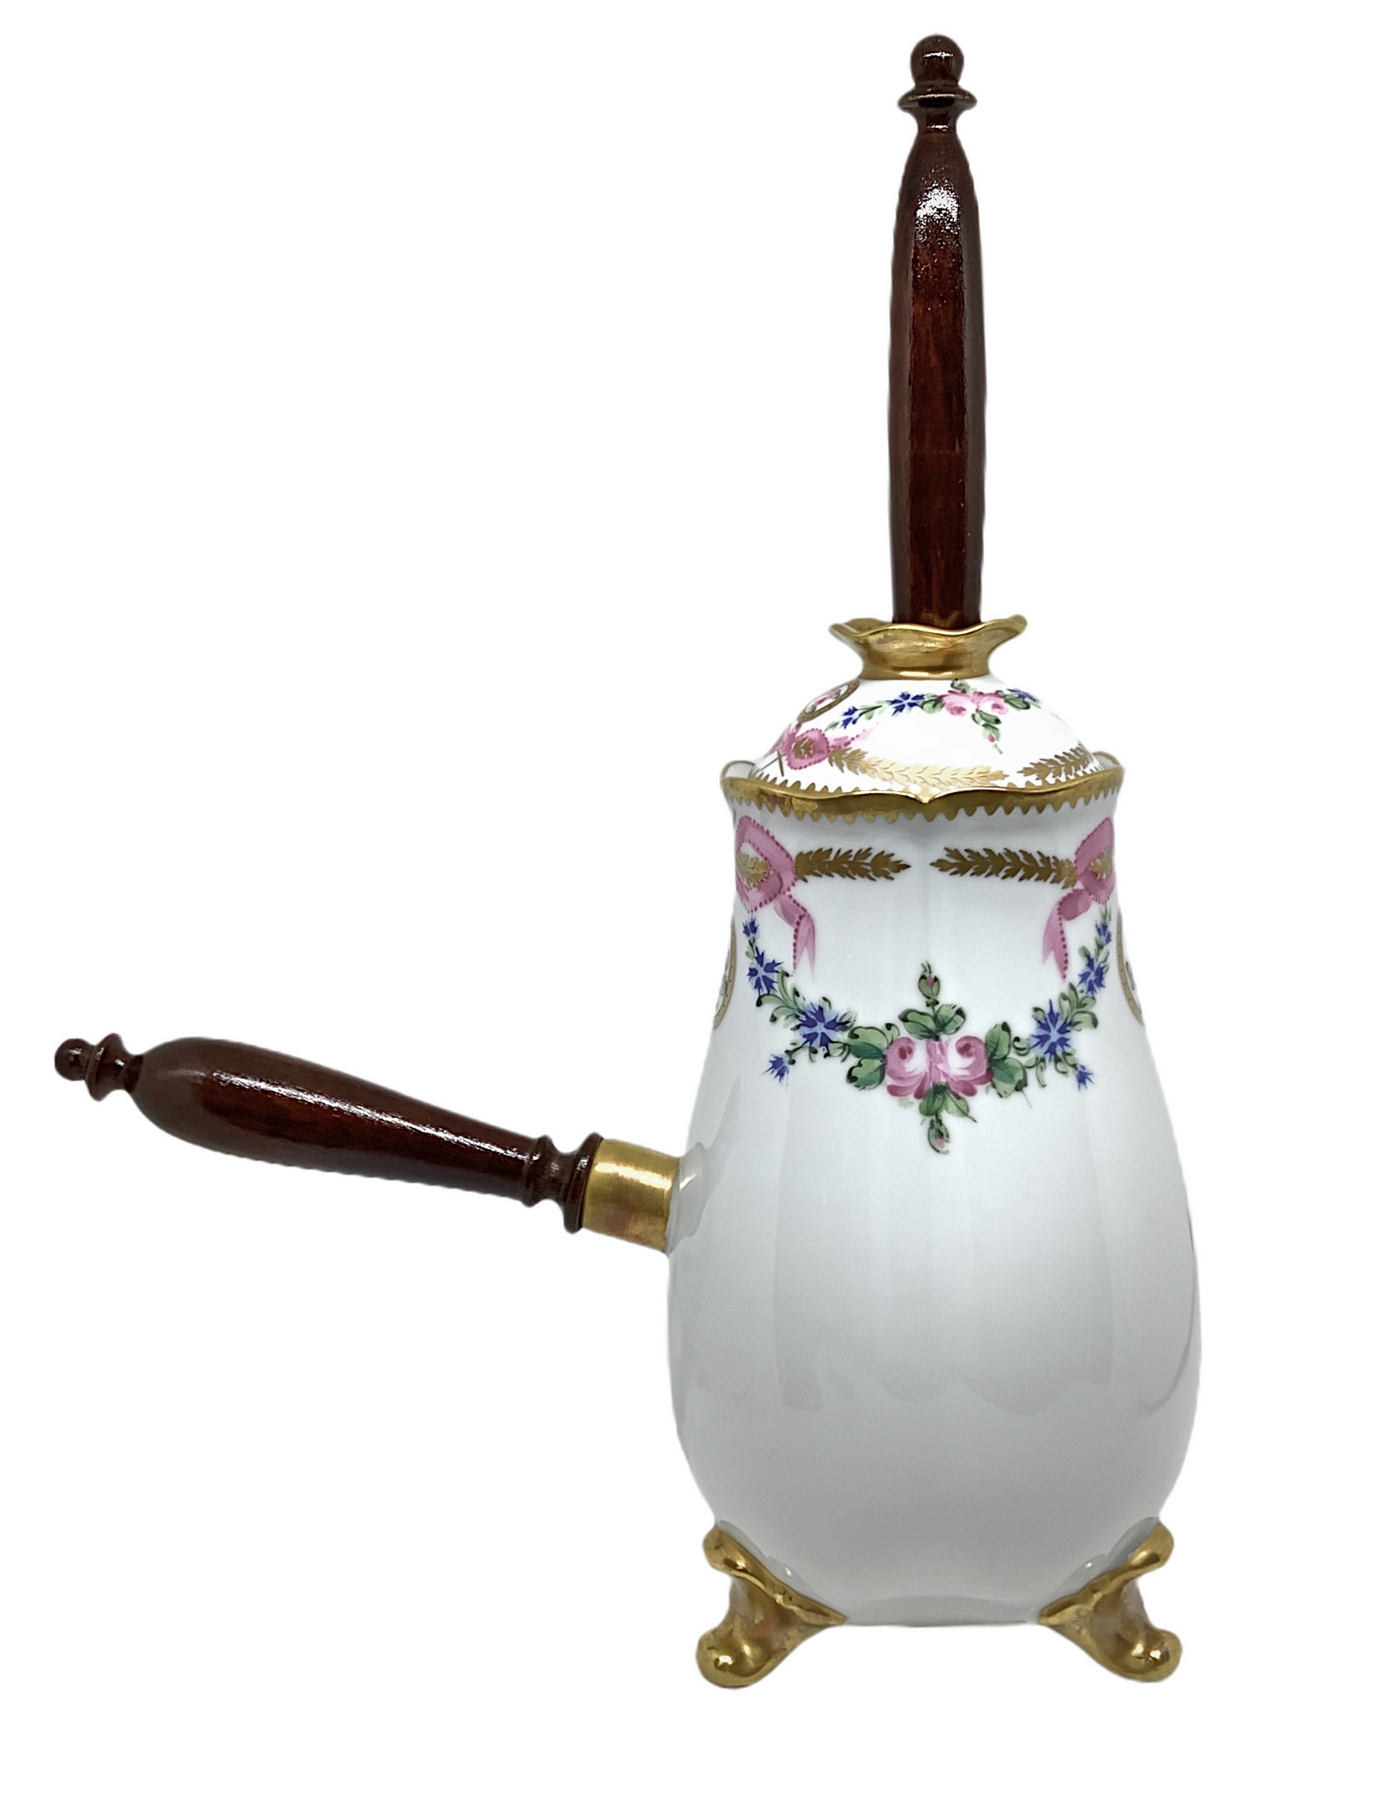 Milk jug with emulsifier, white Limoges porcelain decorated in gold and polychrome, wooden handle. 5 - Image 4 of 6